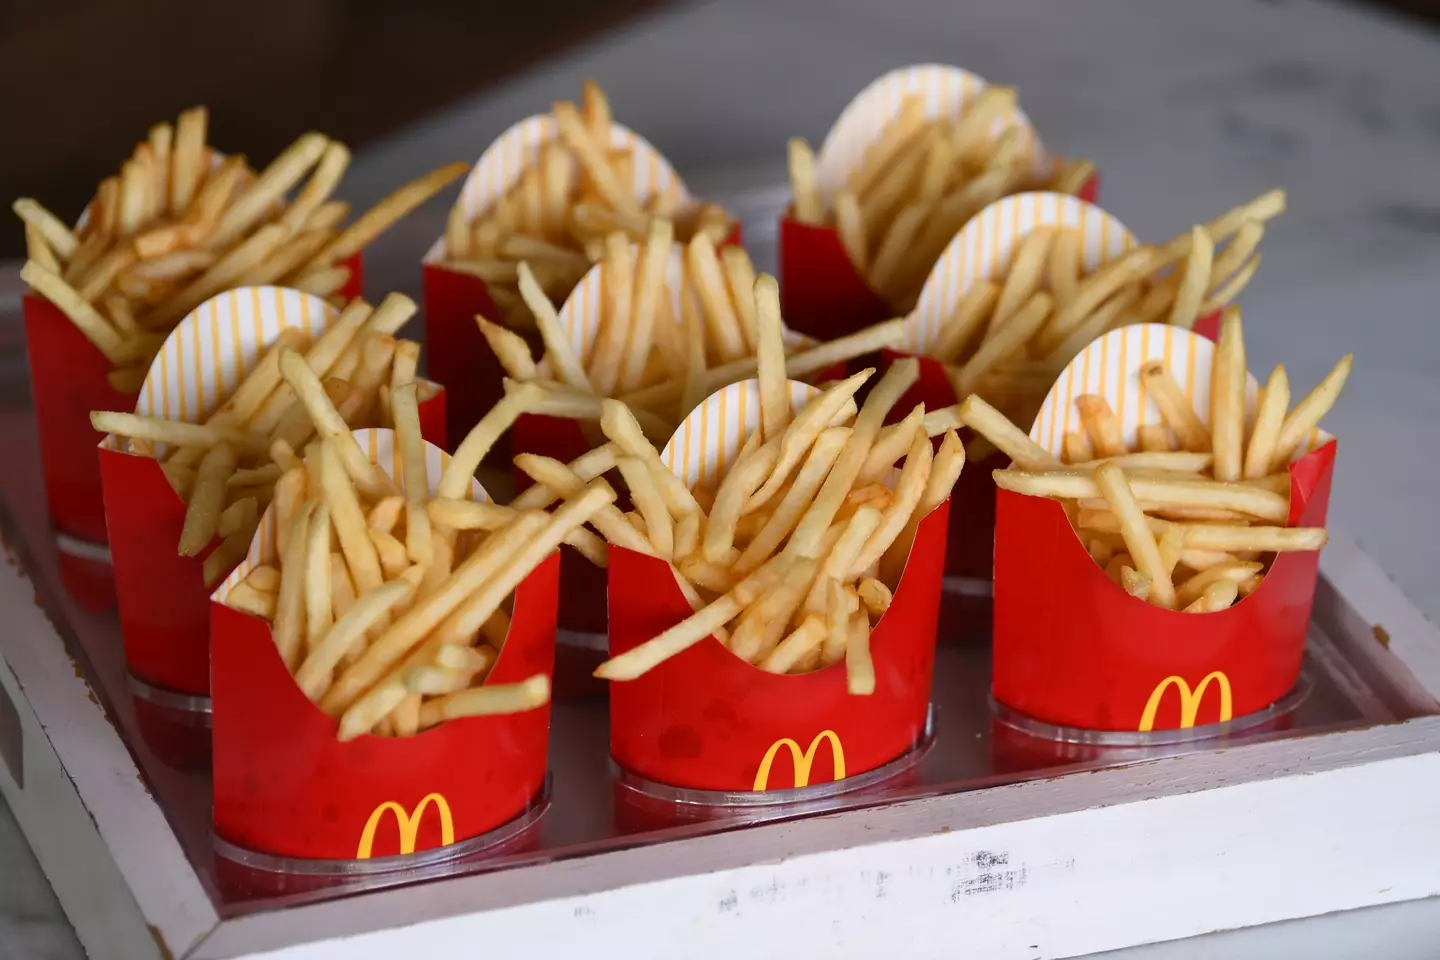 FYI, McDonald's fries in the US are not vegan friendly.